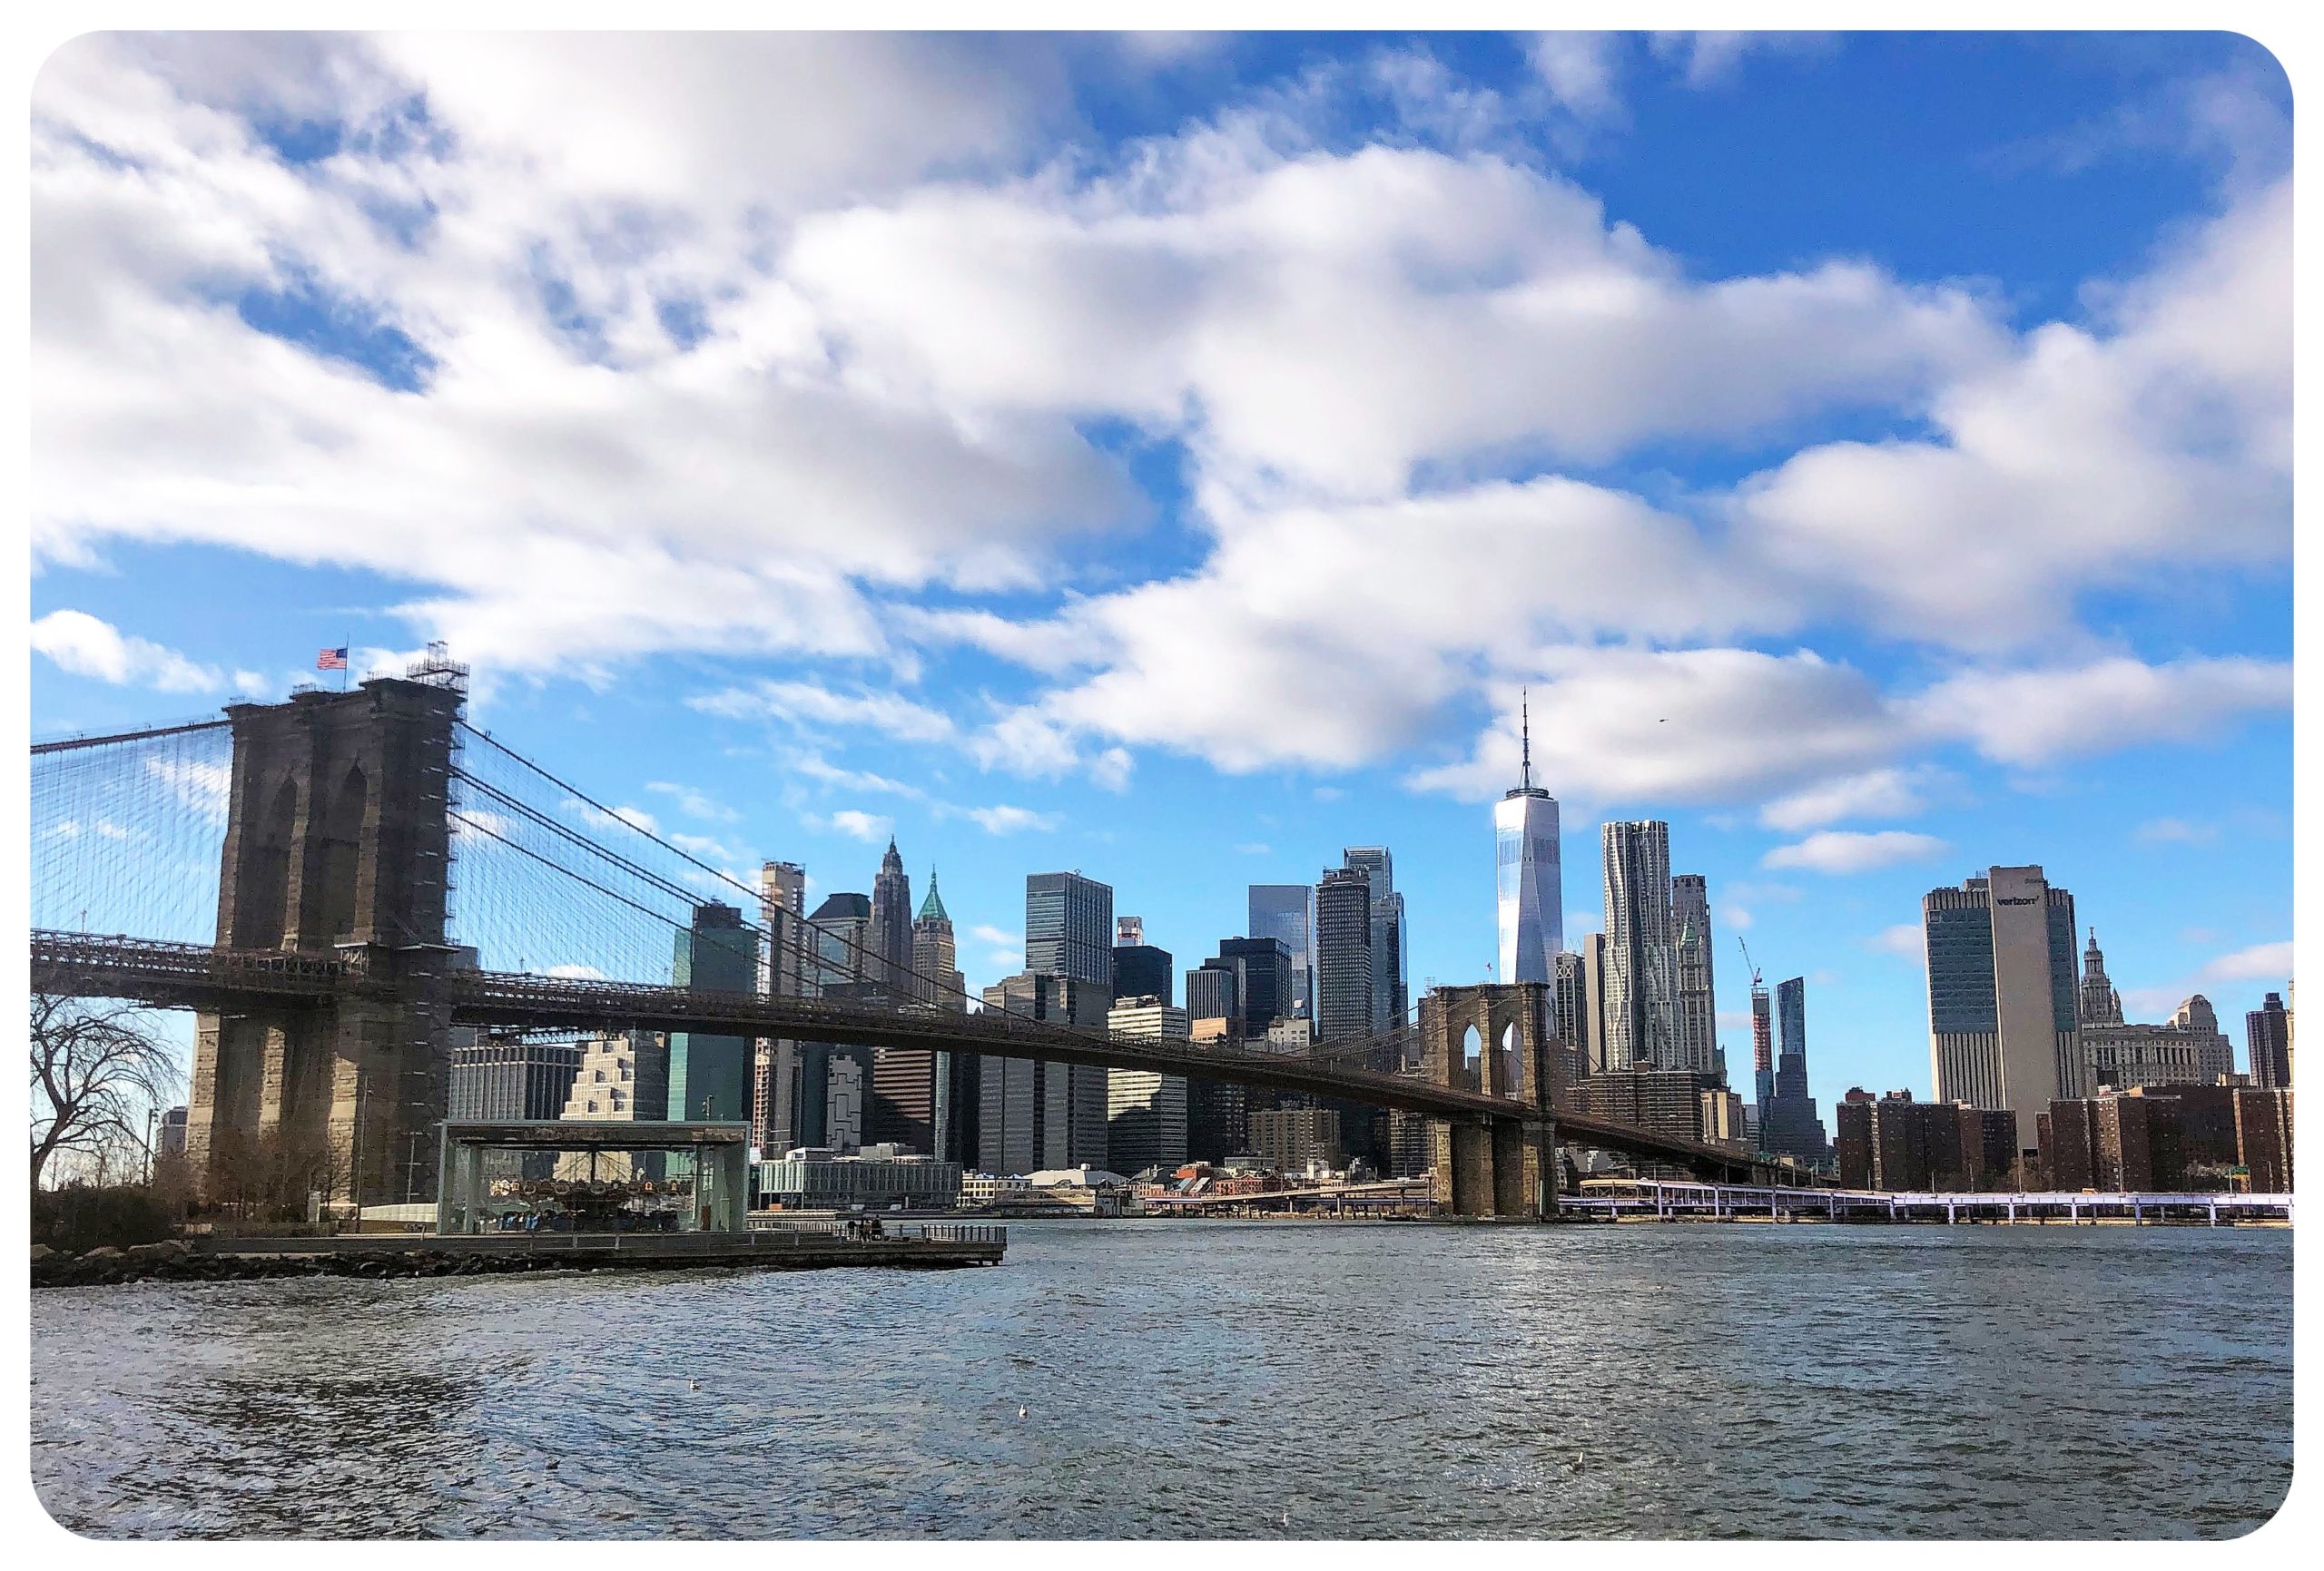 33 things I love about New York City